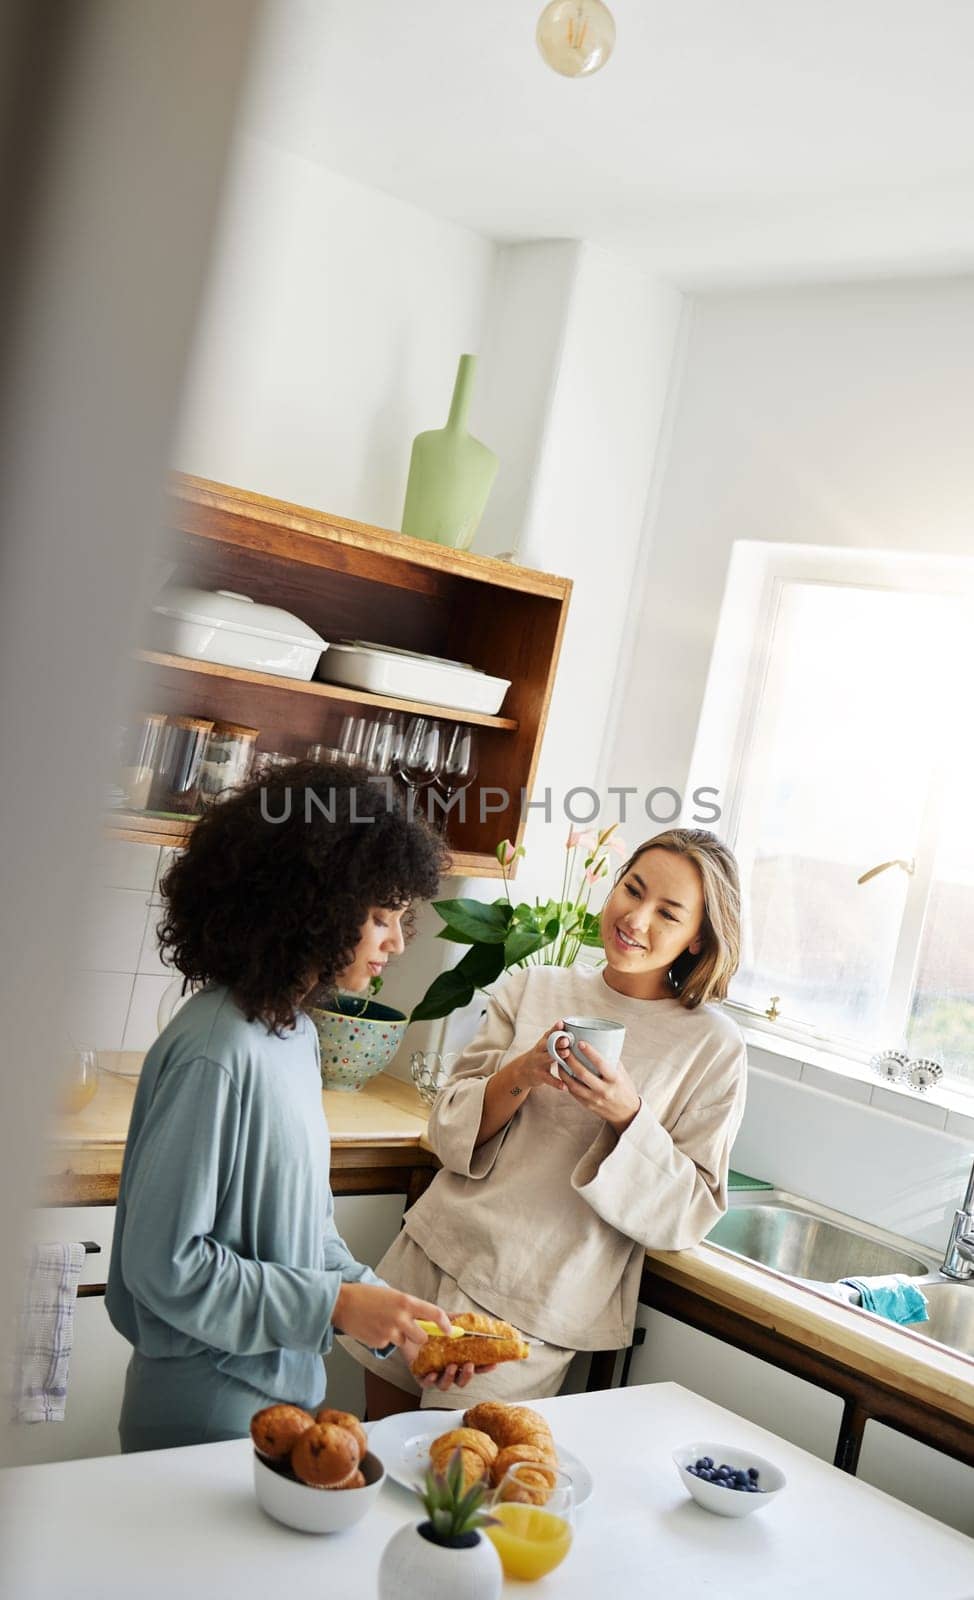 Lesbian, women and couple with love, breakfast and romance with conversation, marriage and bonding. Lgbtq, girls and queer people in a kitchen, home and relationship with trust, speaking and support by YuriArcurs